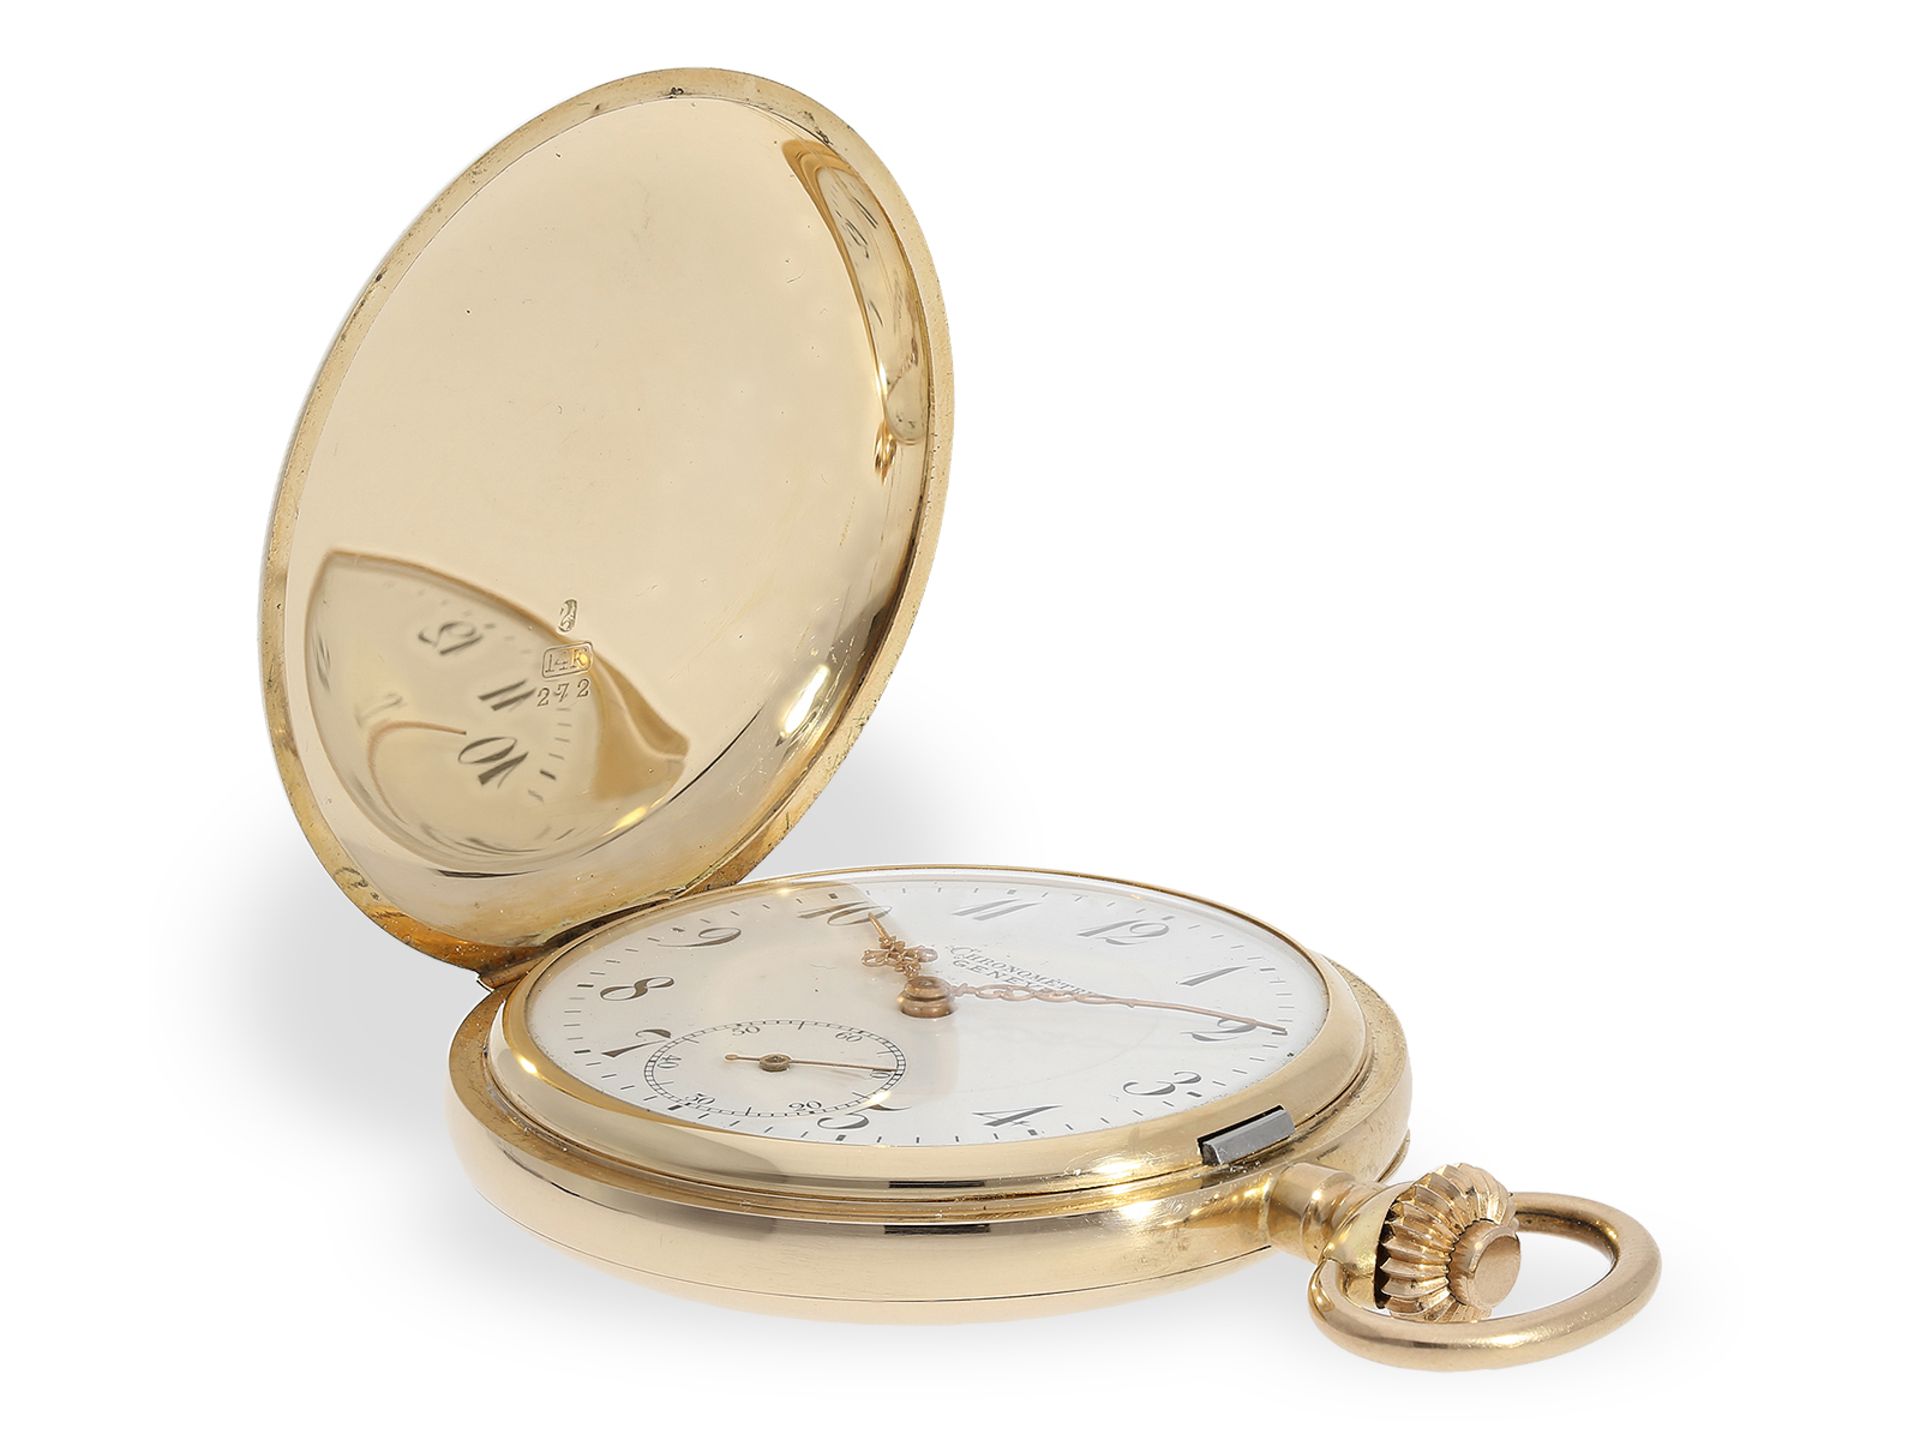 Very fine gold hunting case watch with chronometer escapement, "Chronometre Geneve", ca. 1900 - Image 6 of 8